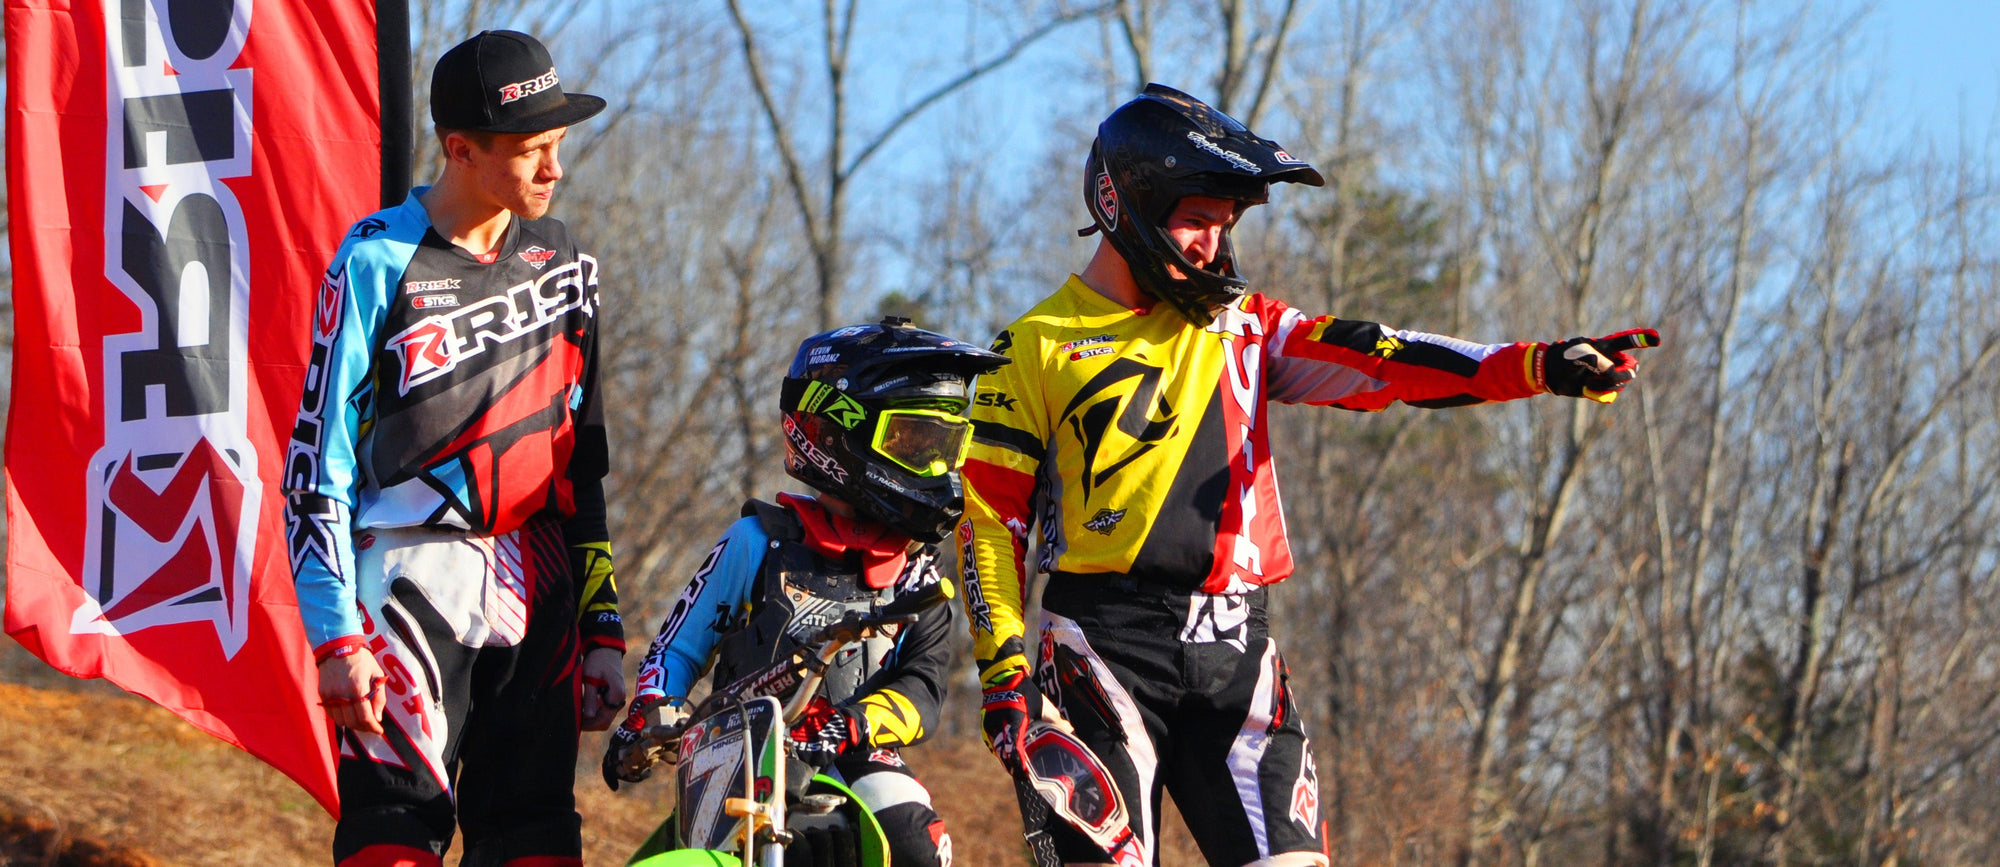 Risk Racing team standing on the landing of a track feature in their signature Ventilate V2 Mix-n-match motocross protective gear. One team member is pointing out another track feature to his teammates.